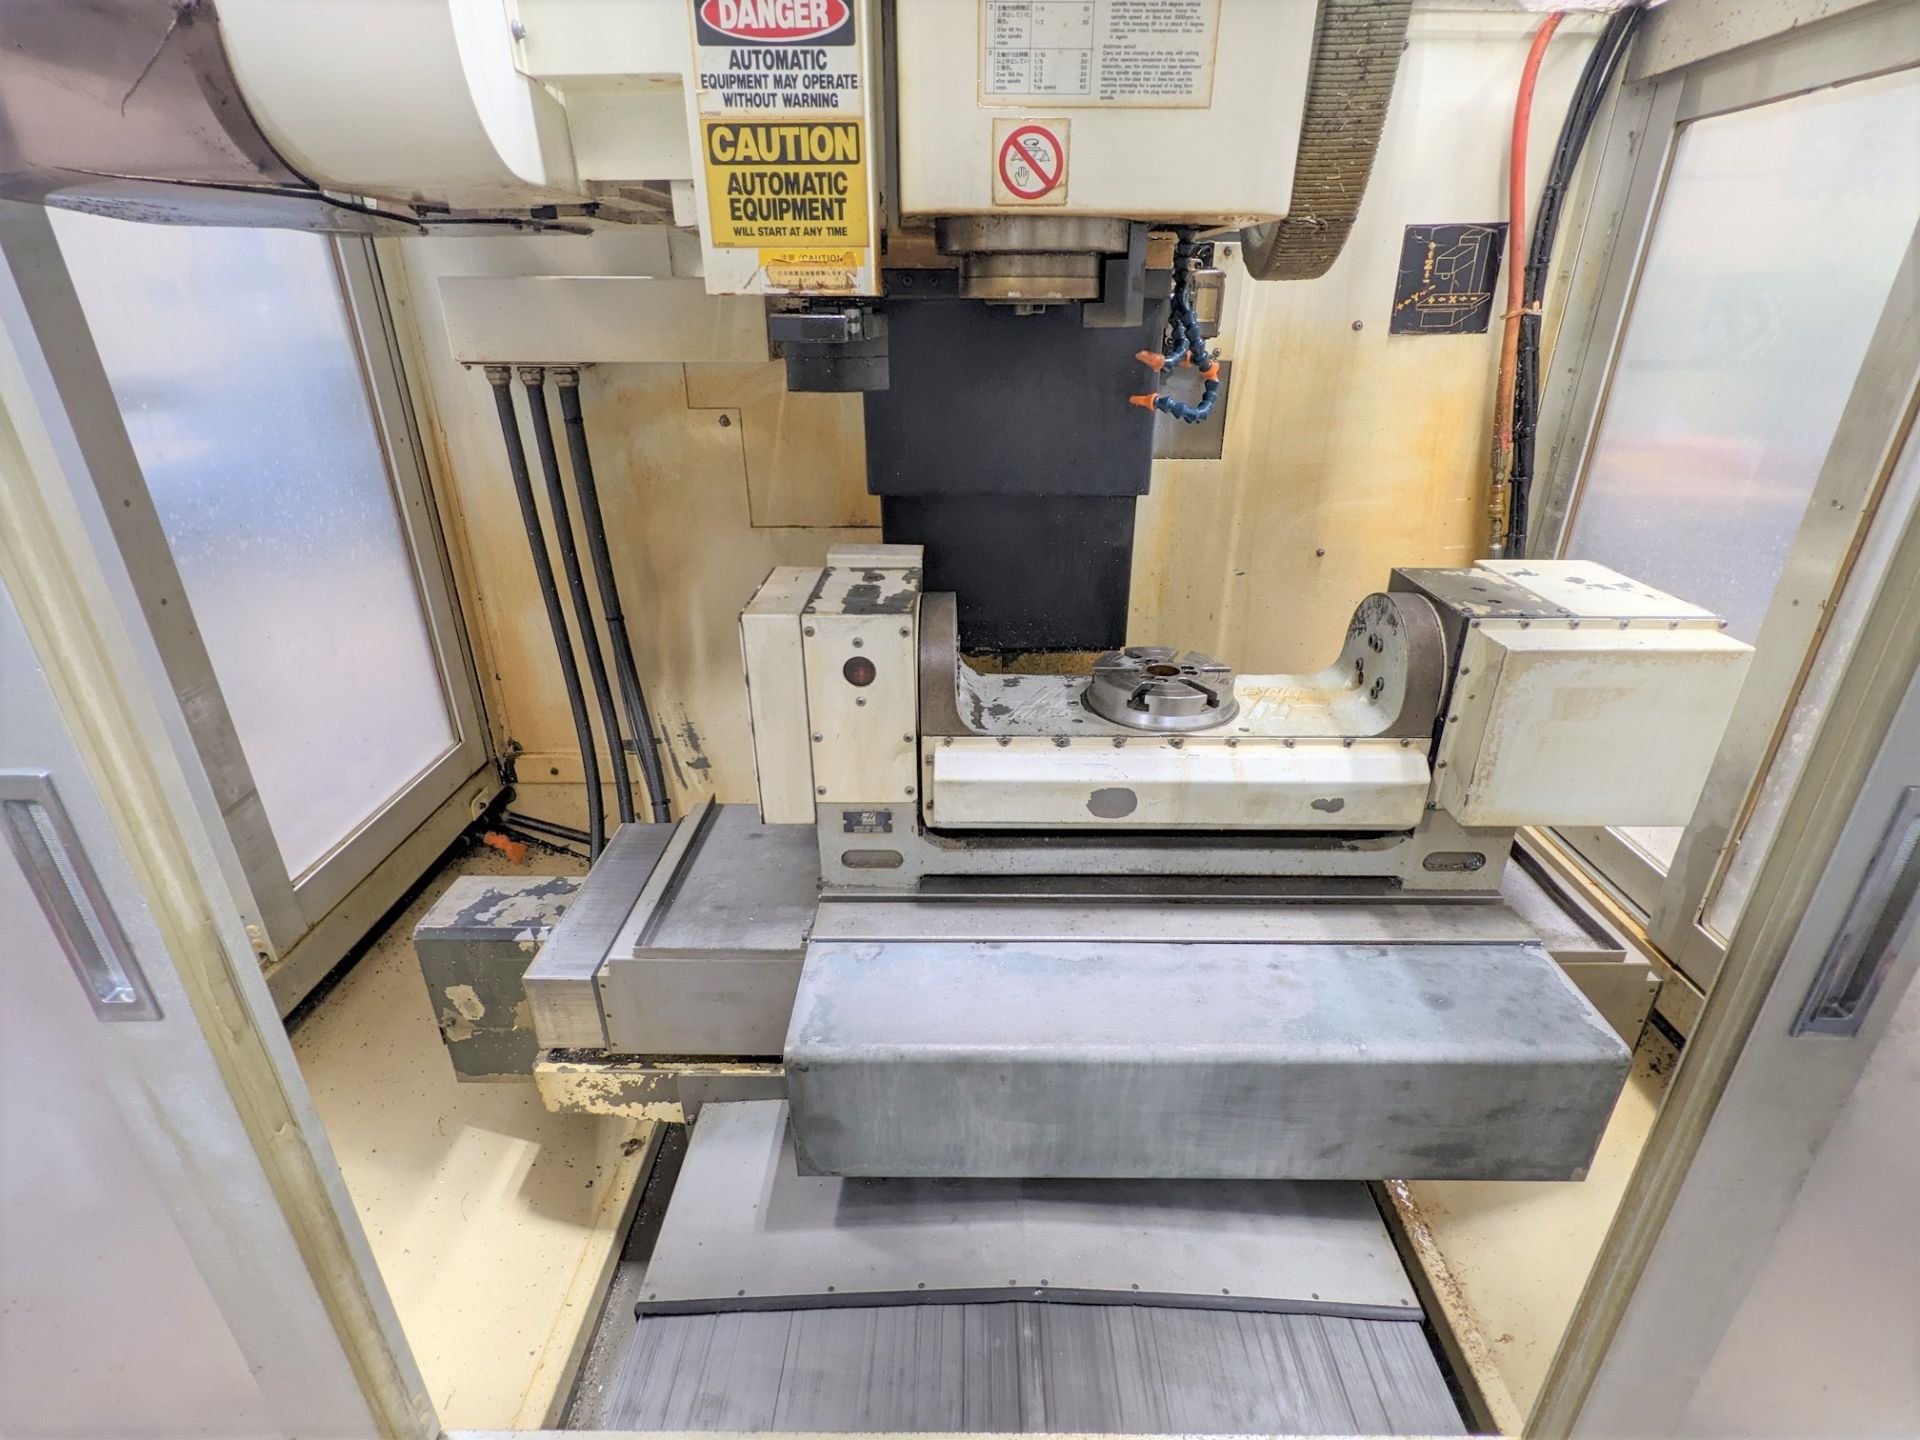 KITAMURA MYCENTER-2X 3+2-AXIS CNC VERTICAL MACHINING CENTER, CNC CONTROL, TRAVELS: X-23”, Y-20”, Z- - Image 5 of 18